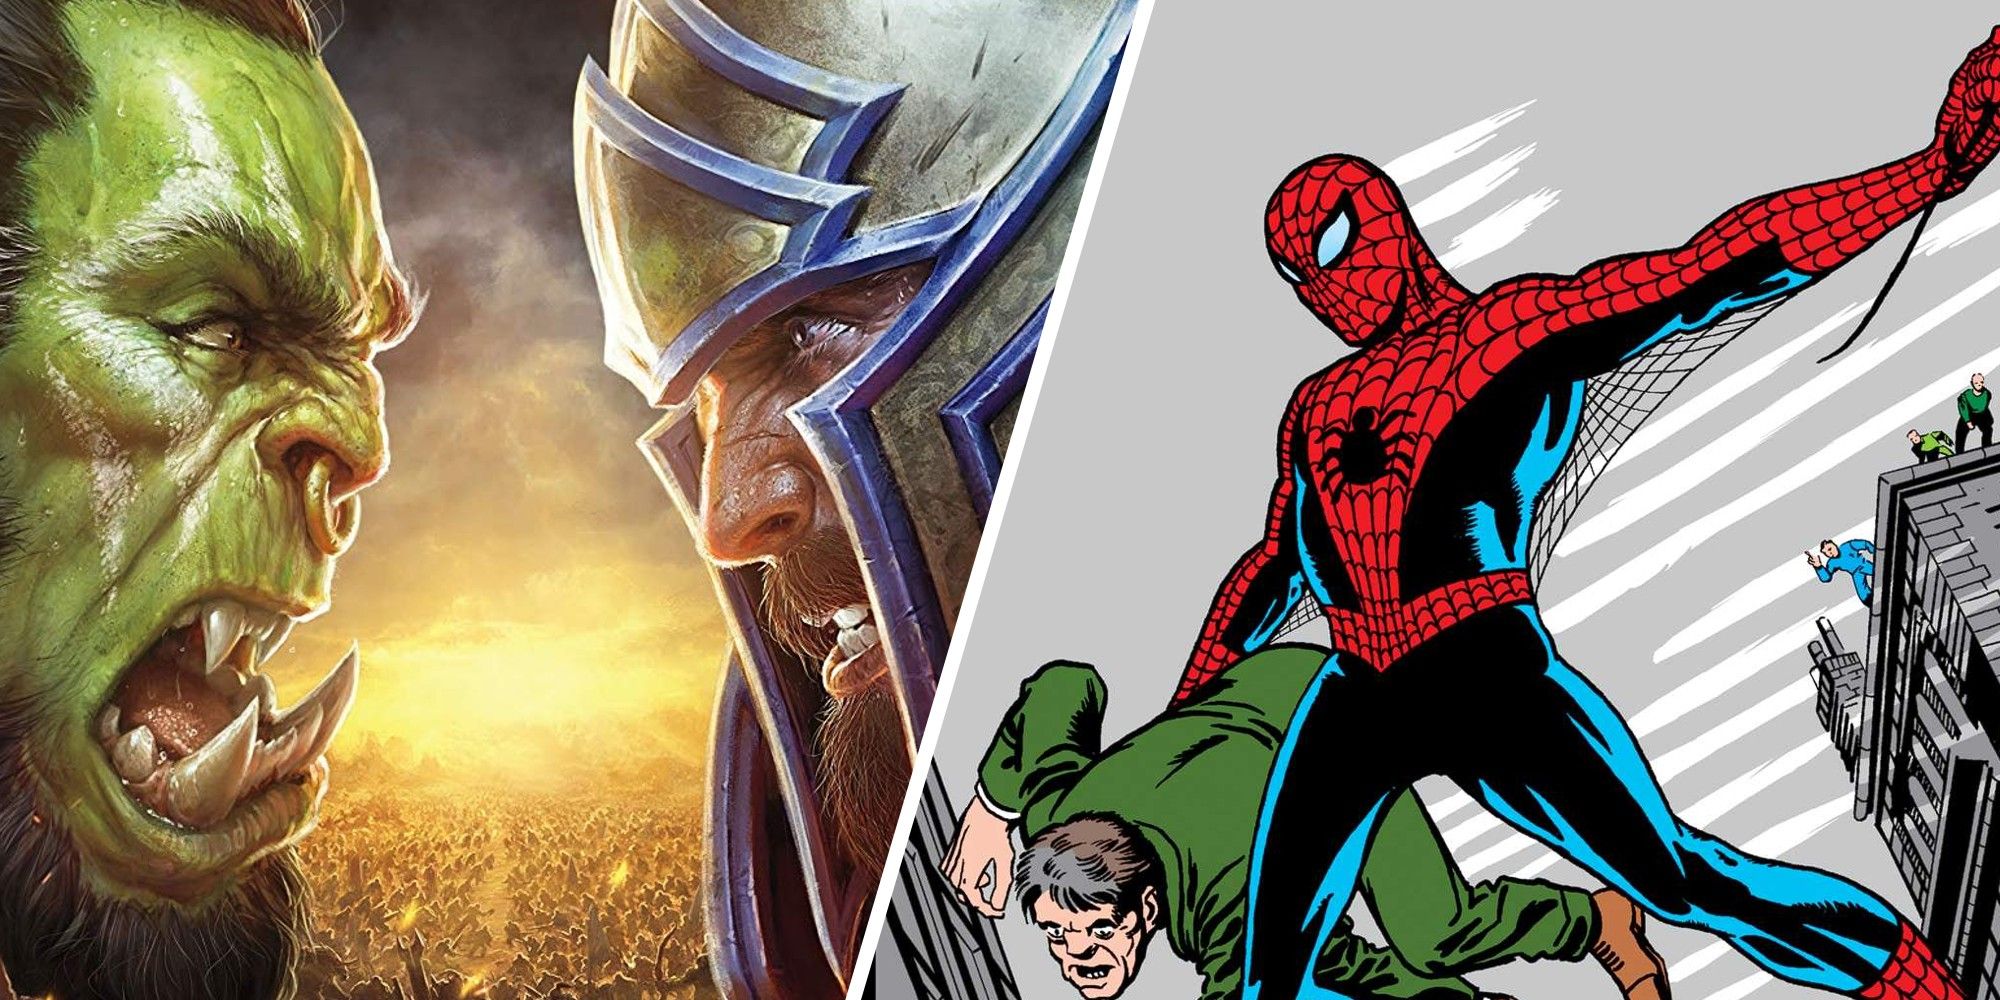 Marvel Snap and Hearthstone Comparison, Source Material, WoW cover art and Spider-Man